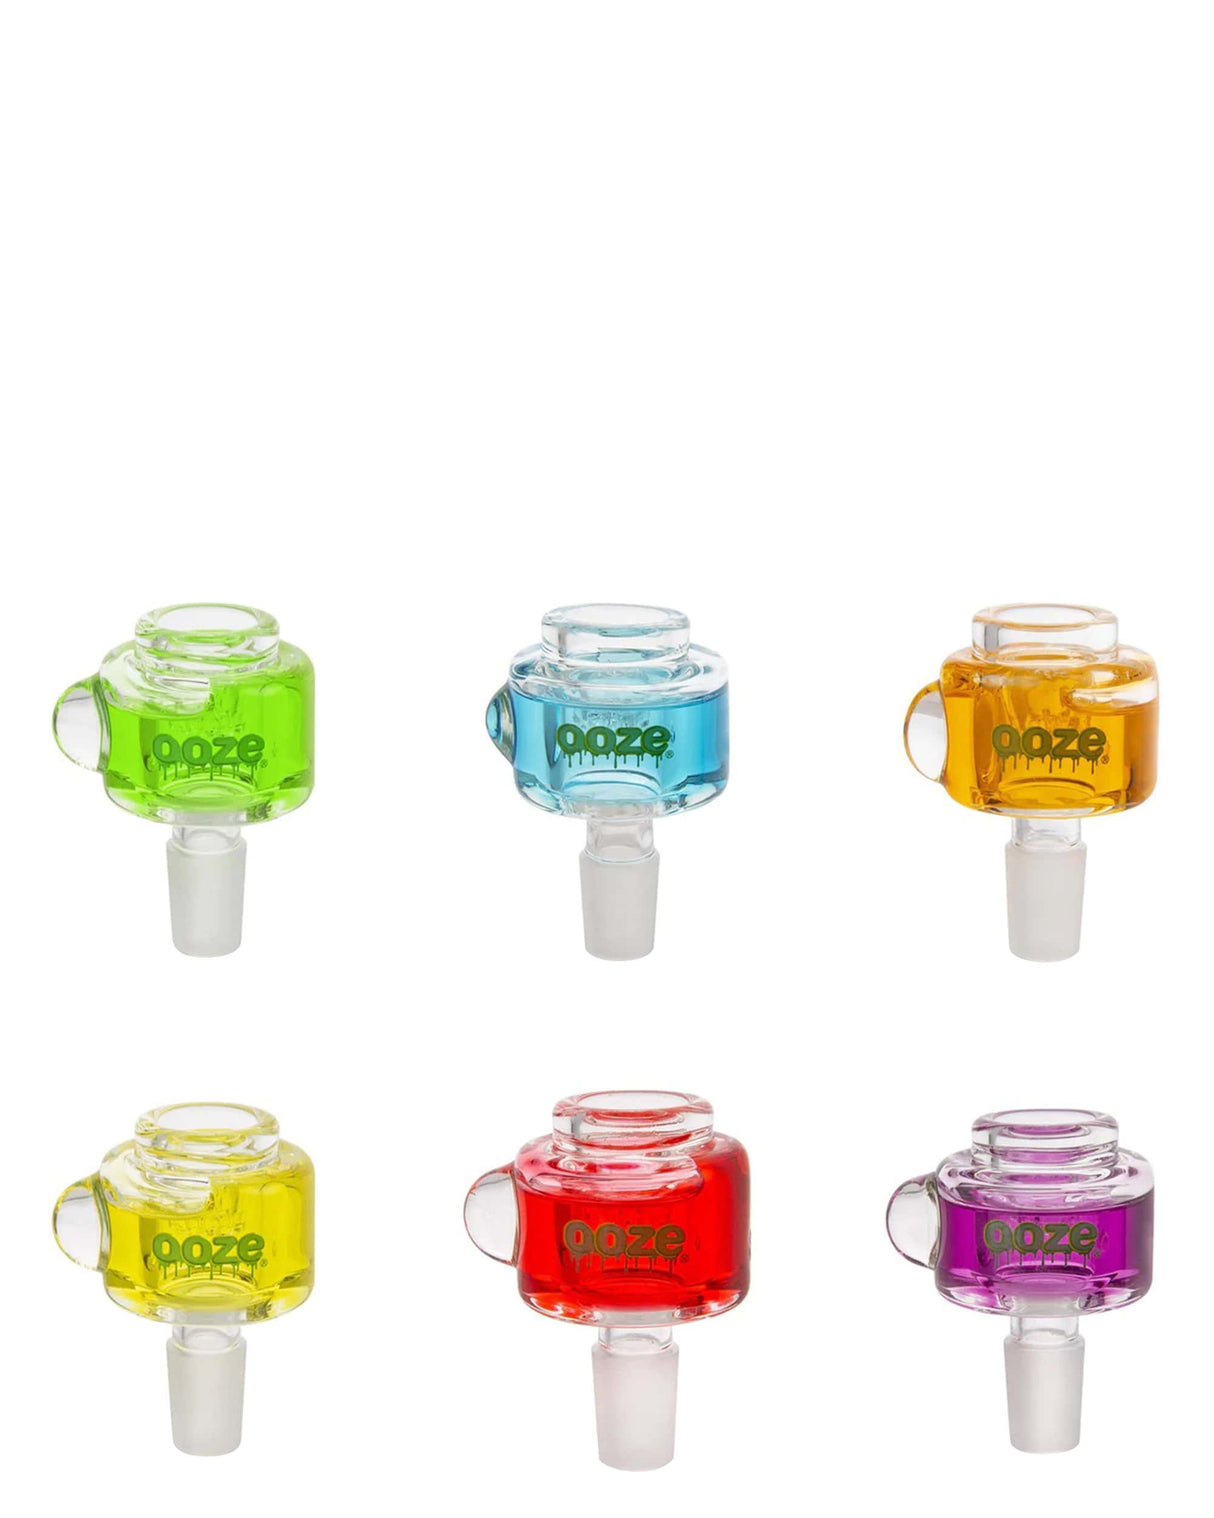 Assorted Ooze Glyco Freezeable Glass Bowls in vibrant colors for bongs, front view on white